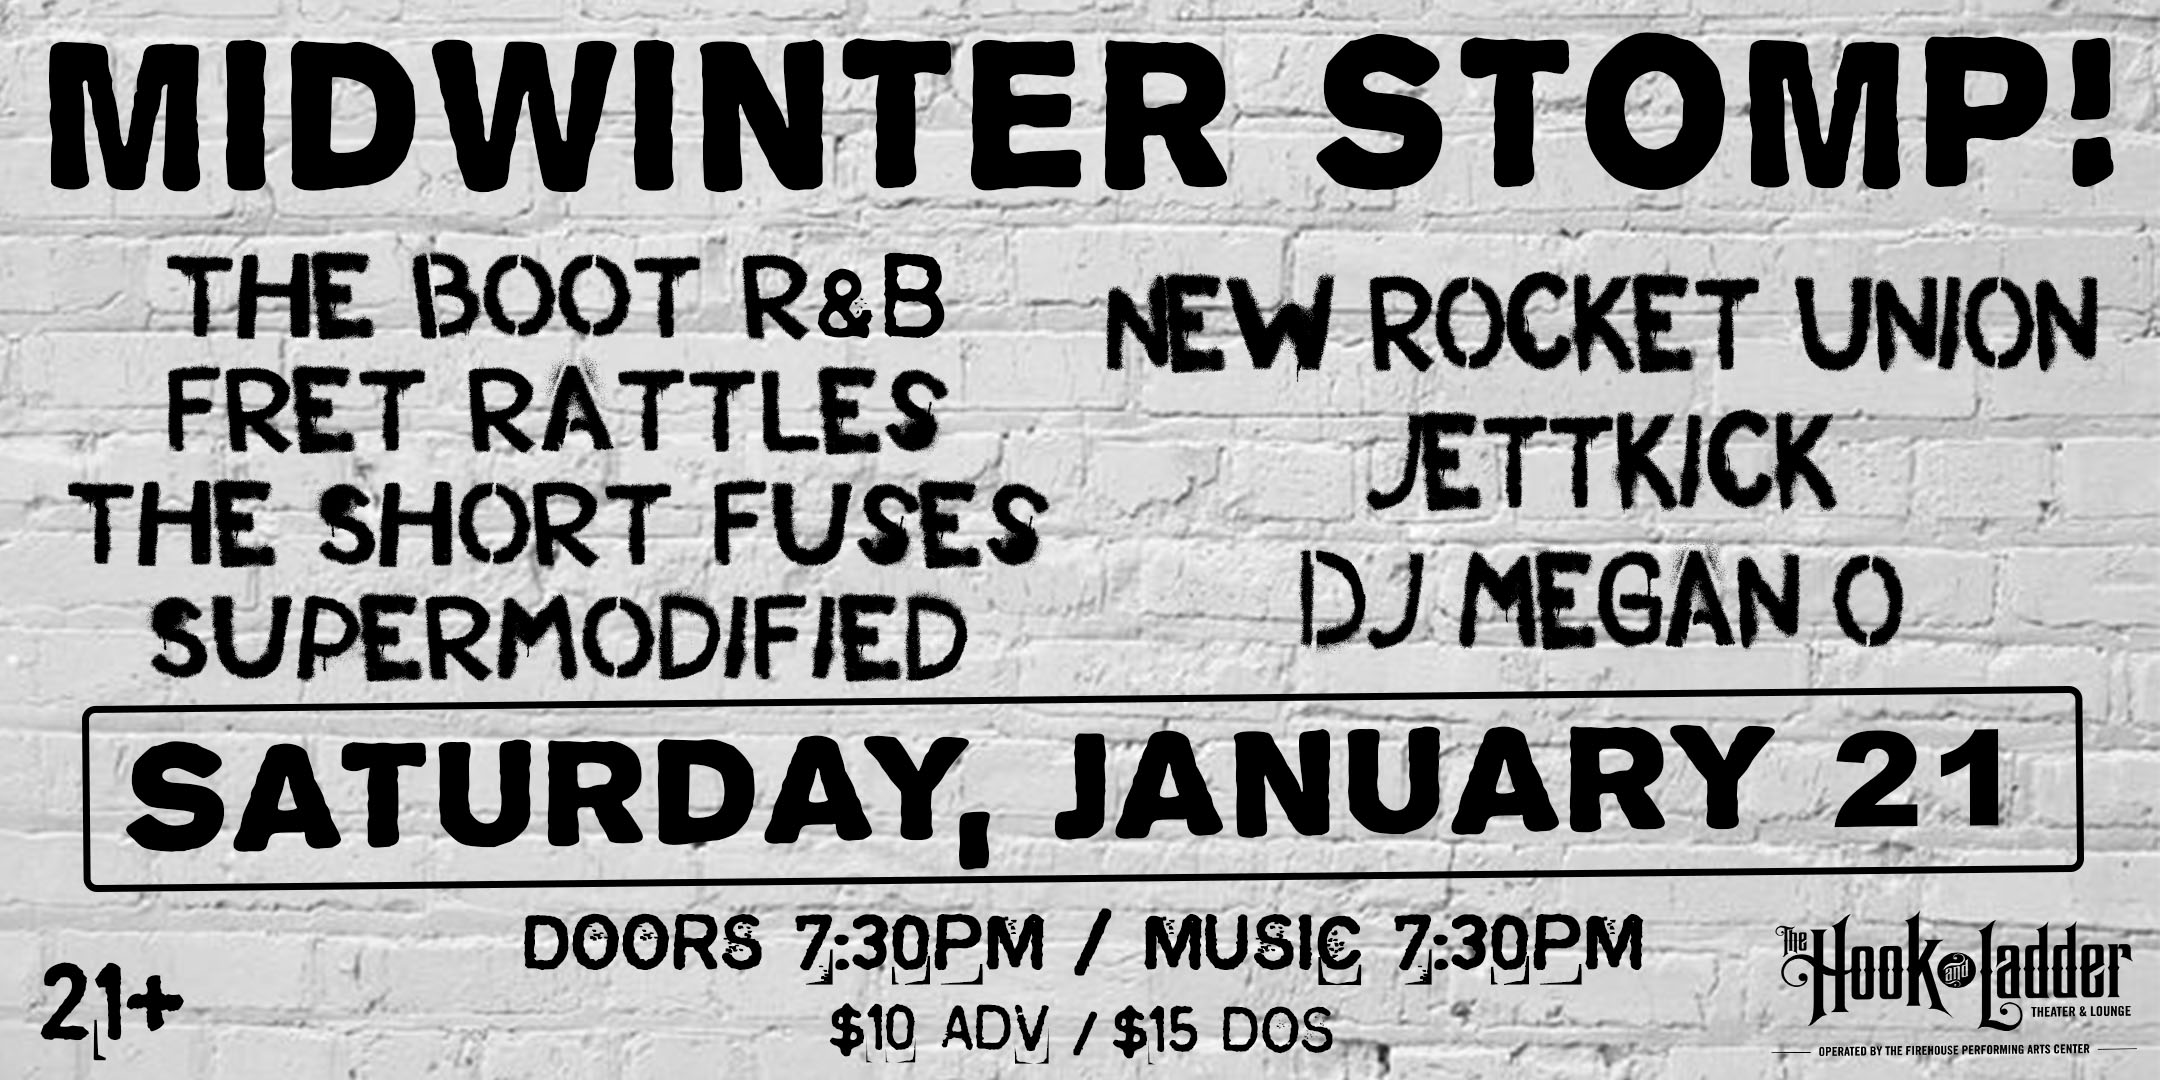 Midwinter Stomp! The Boot R&B Fret Rattles The Short Fuses SuperModified New Rocket Union Jettkick DJ Megan O Saturday, January 21 The Hook and Ladder Theater Doors 7:30pm :: Music 7:30pm :: 21+ General Admission $10 ADV / $15 DOS * Does not include fees NO REFUNDS